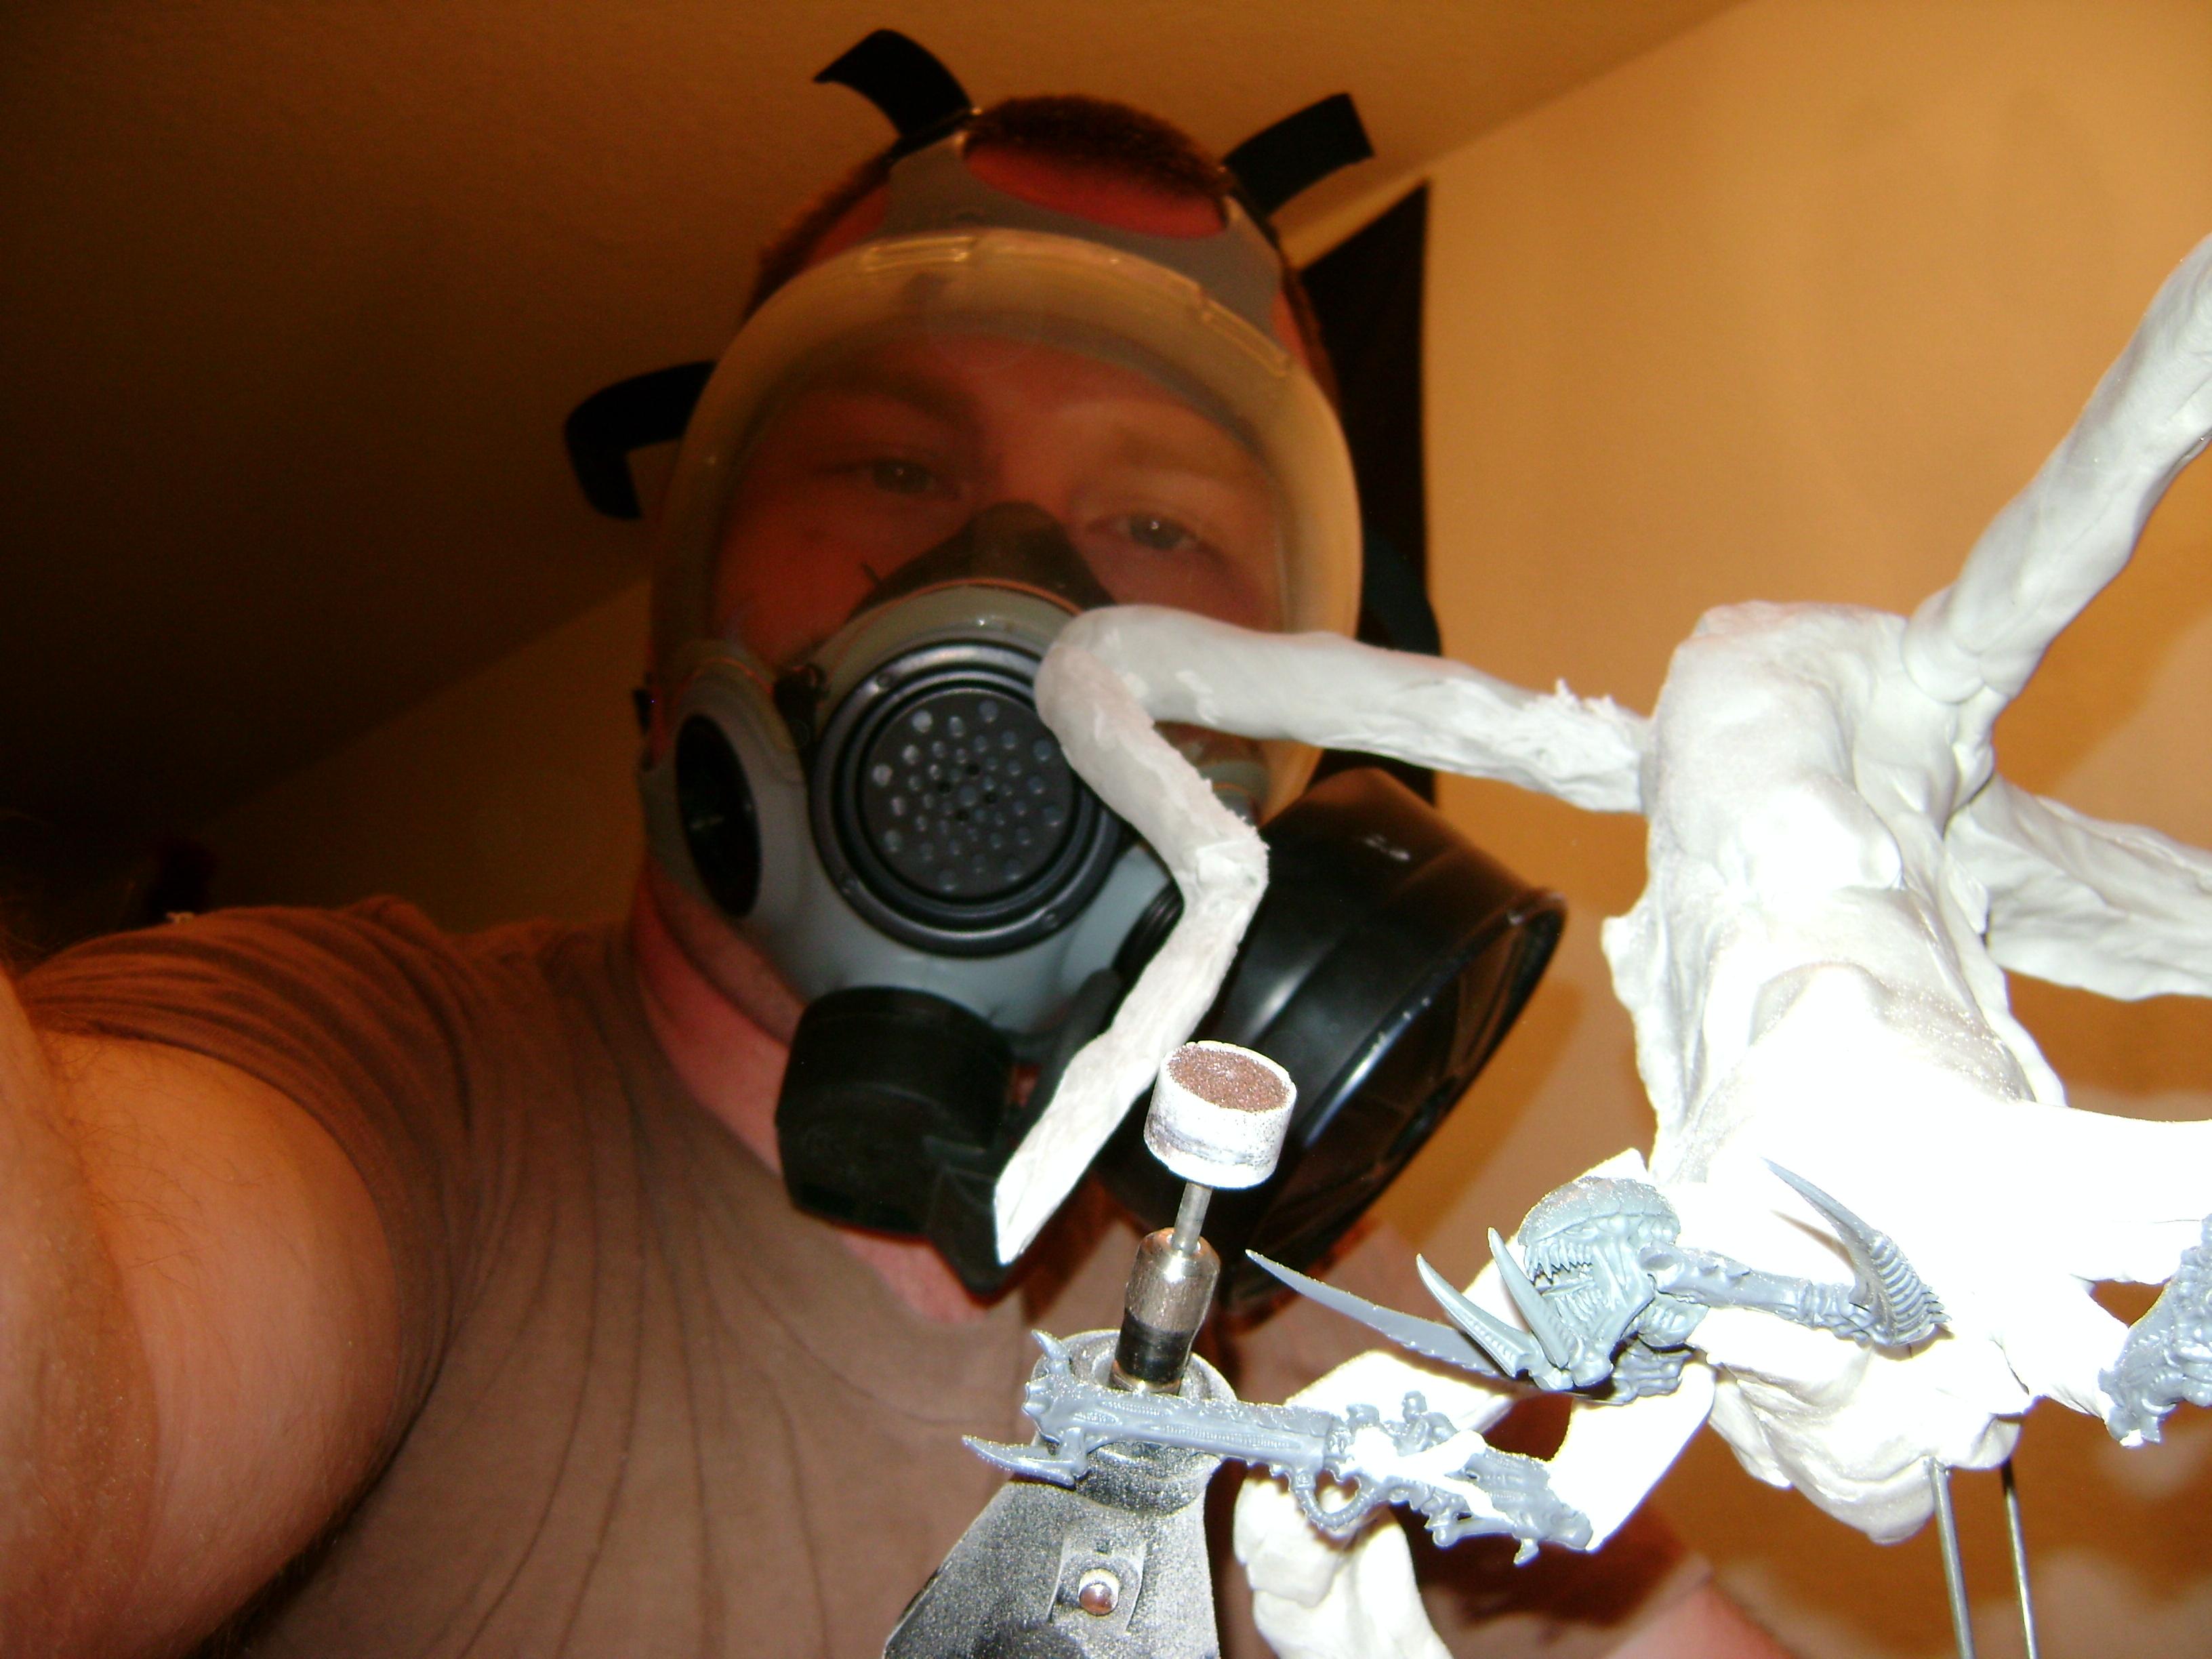 Useing my gasmask as a resperator when sanding the kneadite